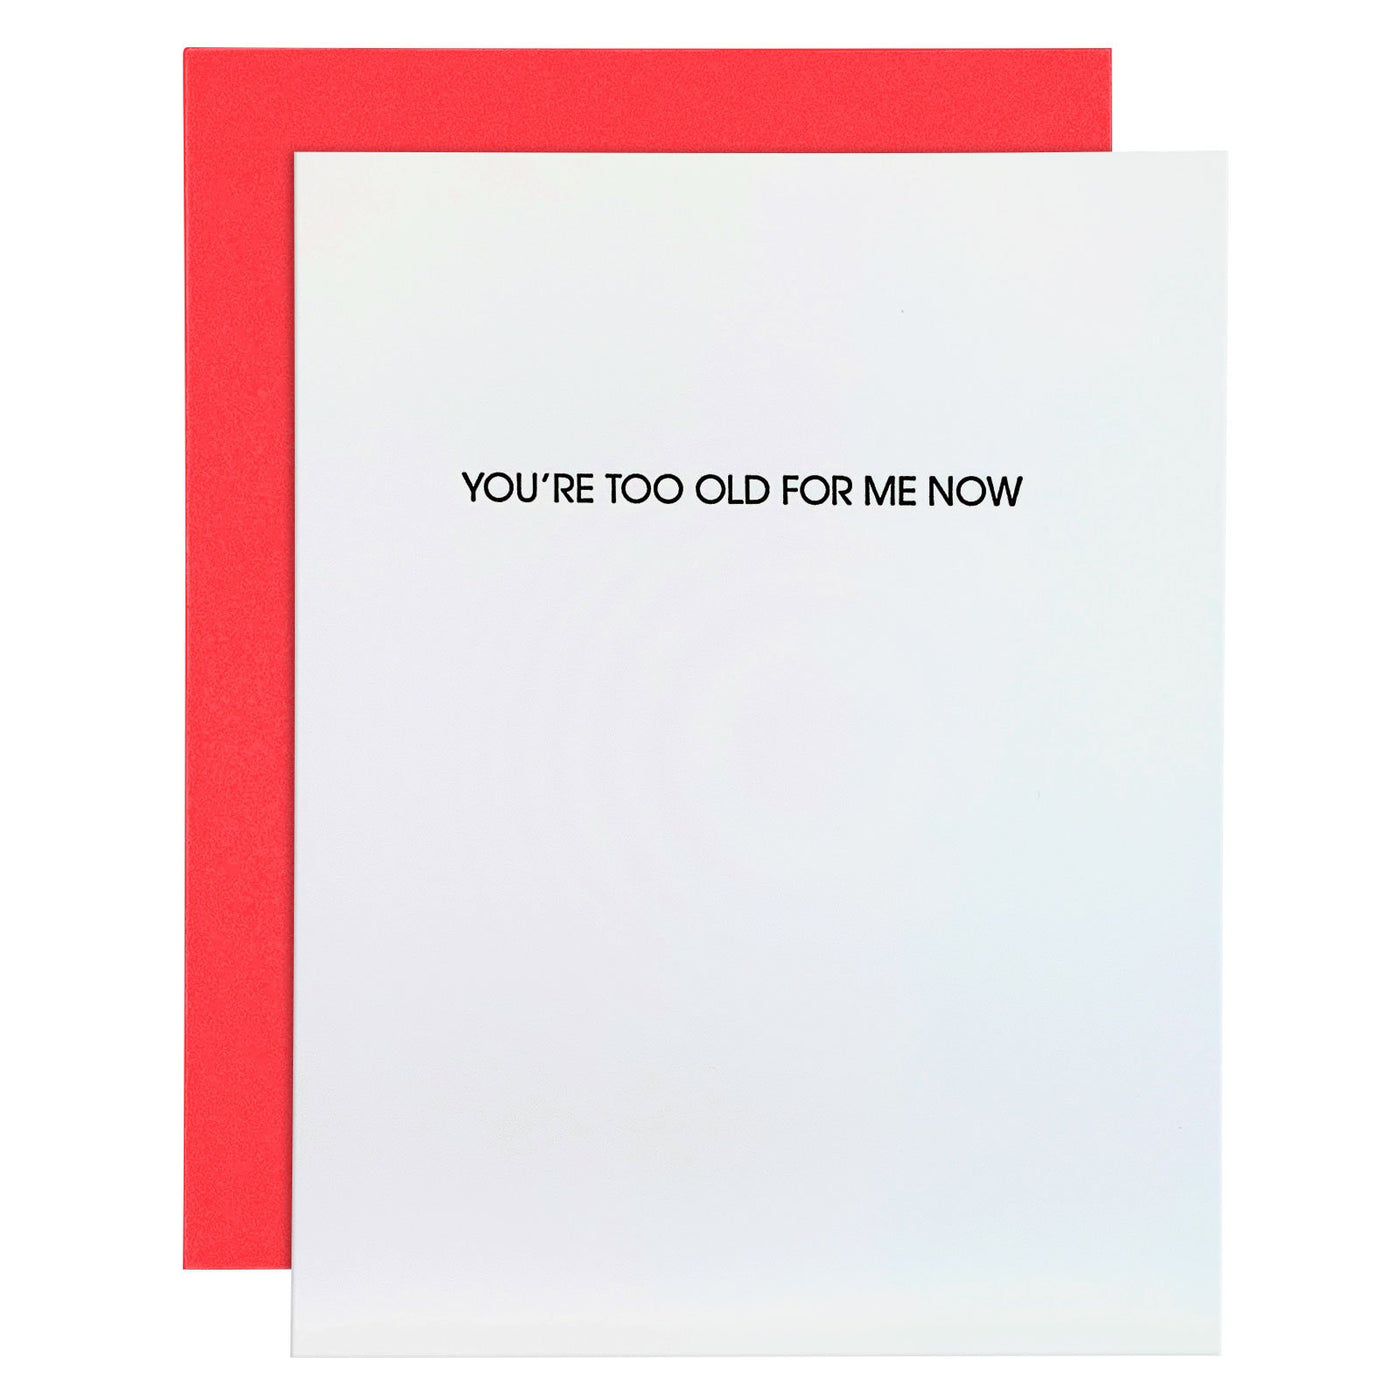 BIRTHDAY GREETING CARD "YOU'RE TOO OLD FOR ME NOW"